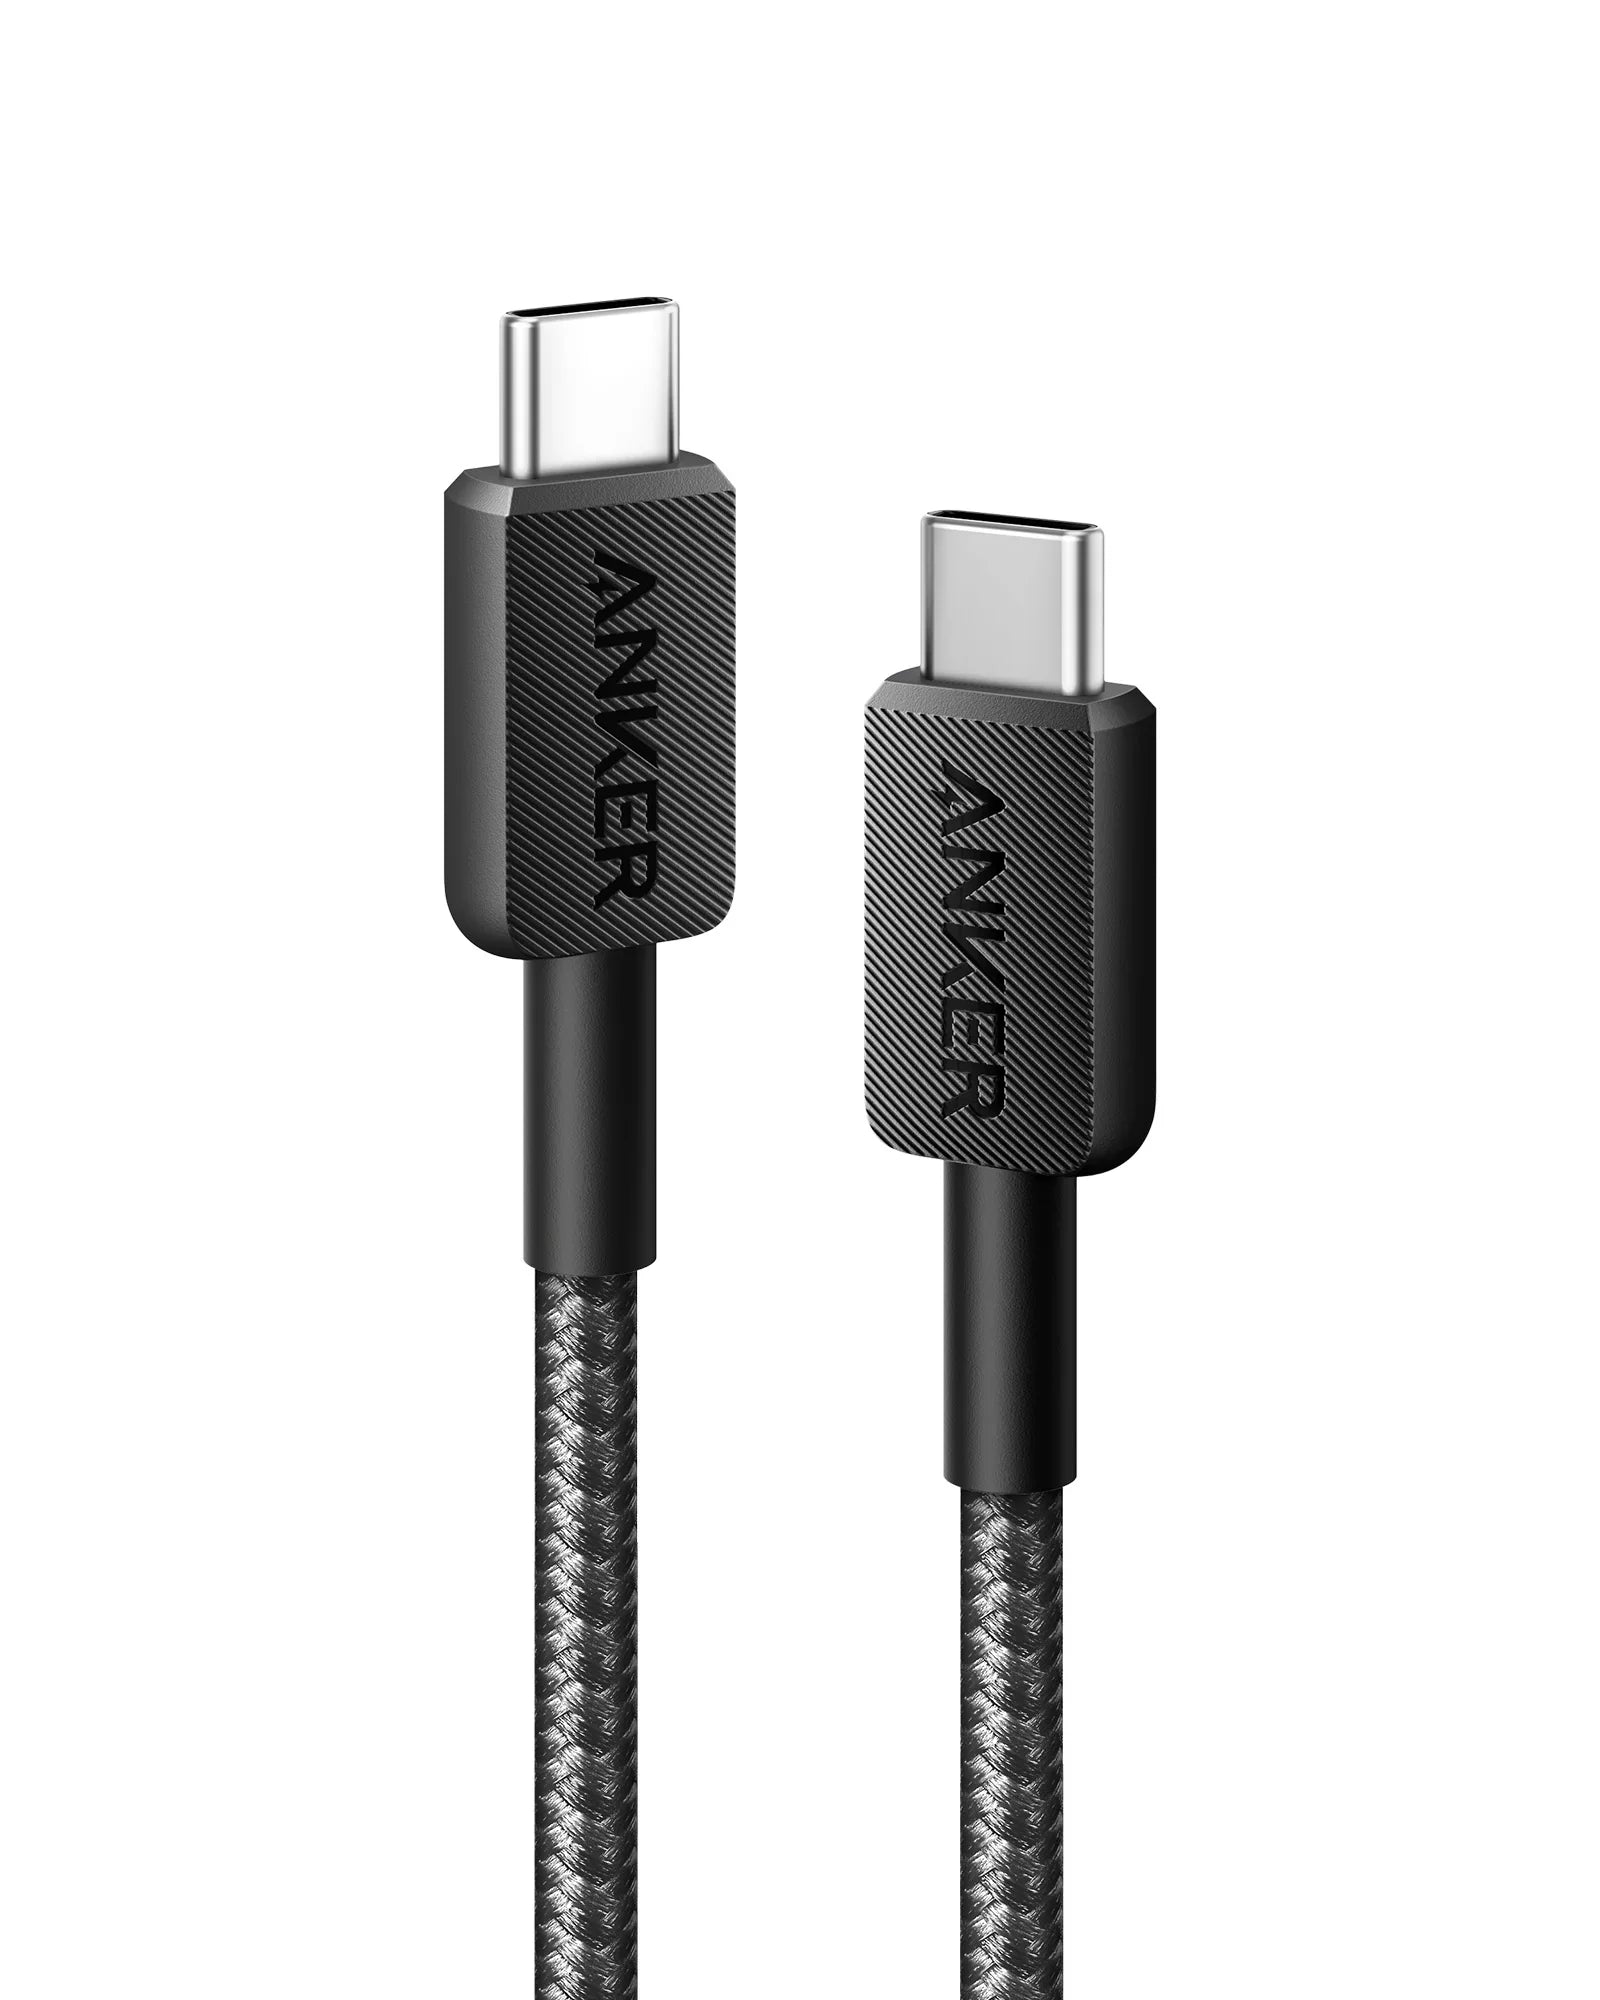 Anker 322 USB-C to USB-C Cable 60W Braided 1.8m with 18 months warranty